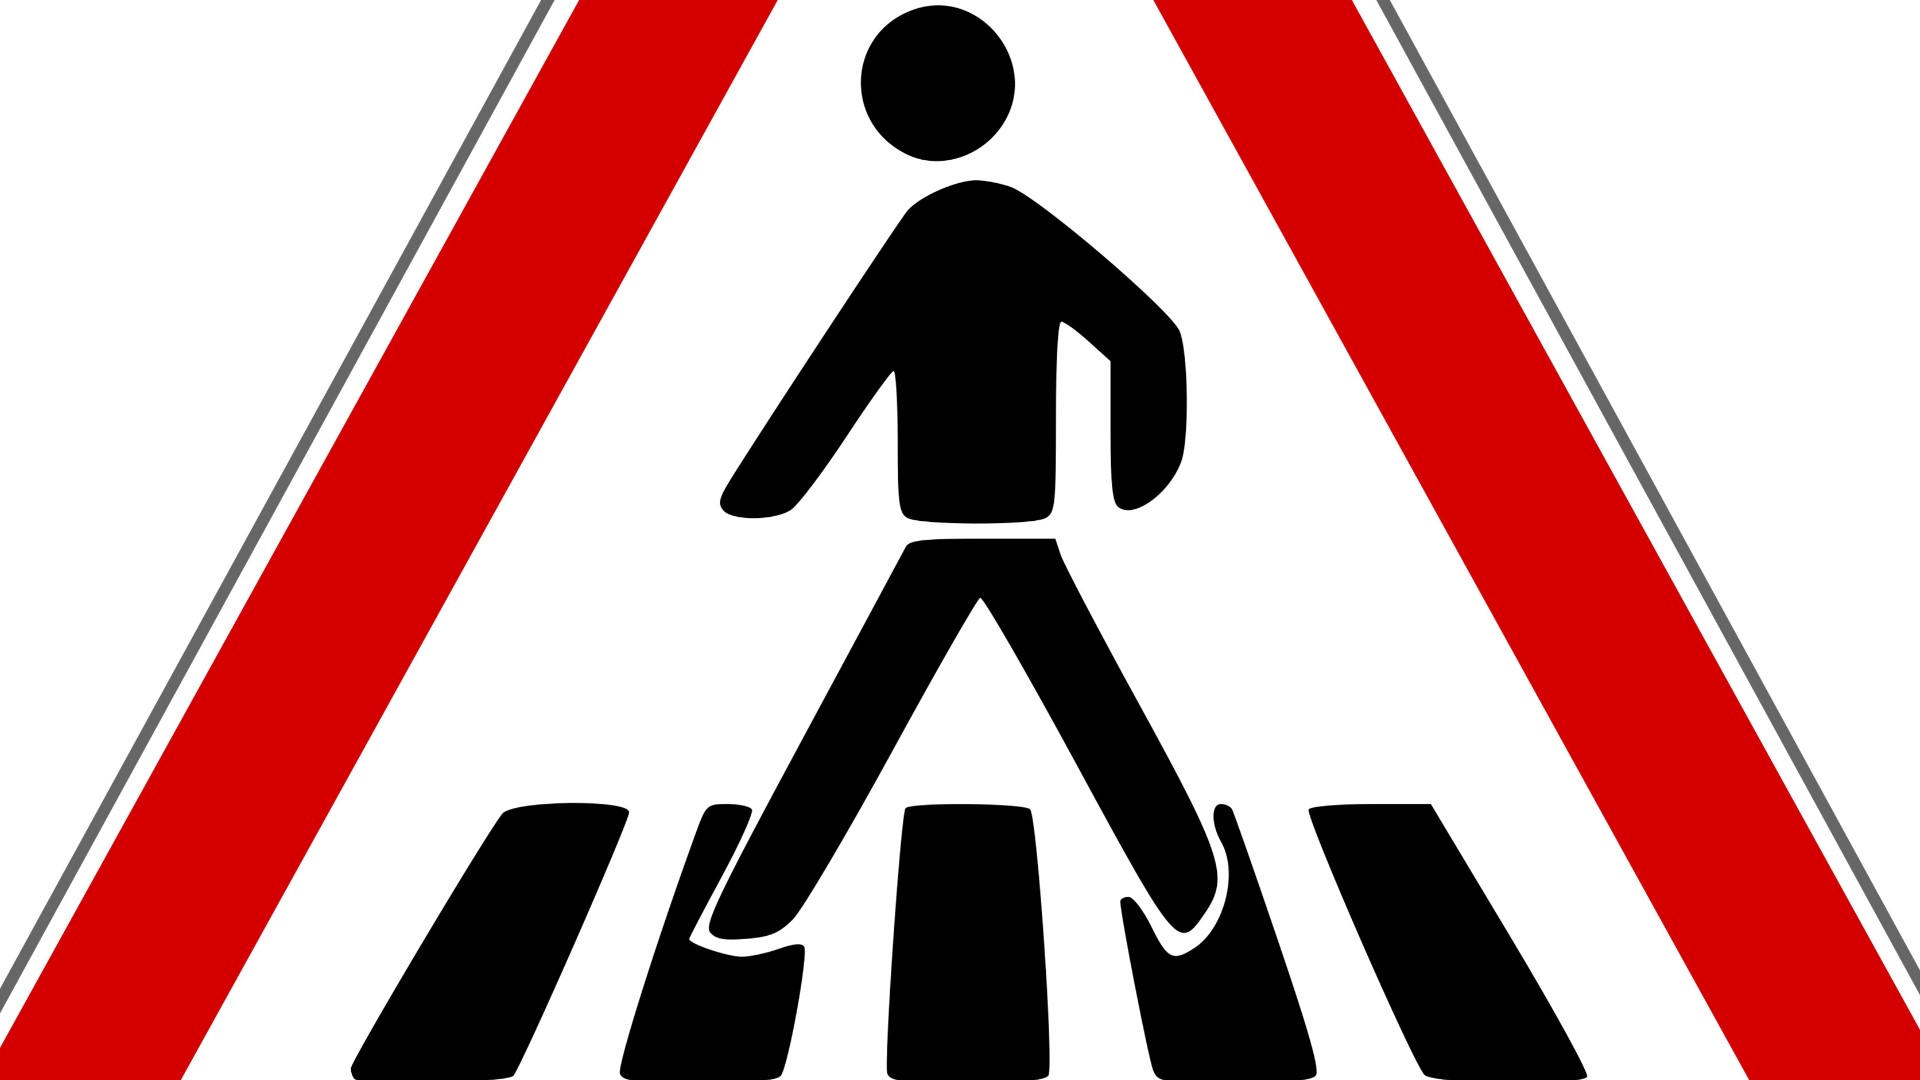 NC law states cars must yield to pedestrians in crosswalks, even if the crosswalk isn’t at an intersection, and even if the pedestrian is waiting on the sidewalk.